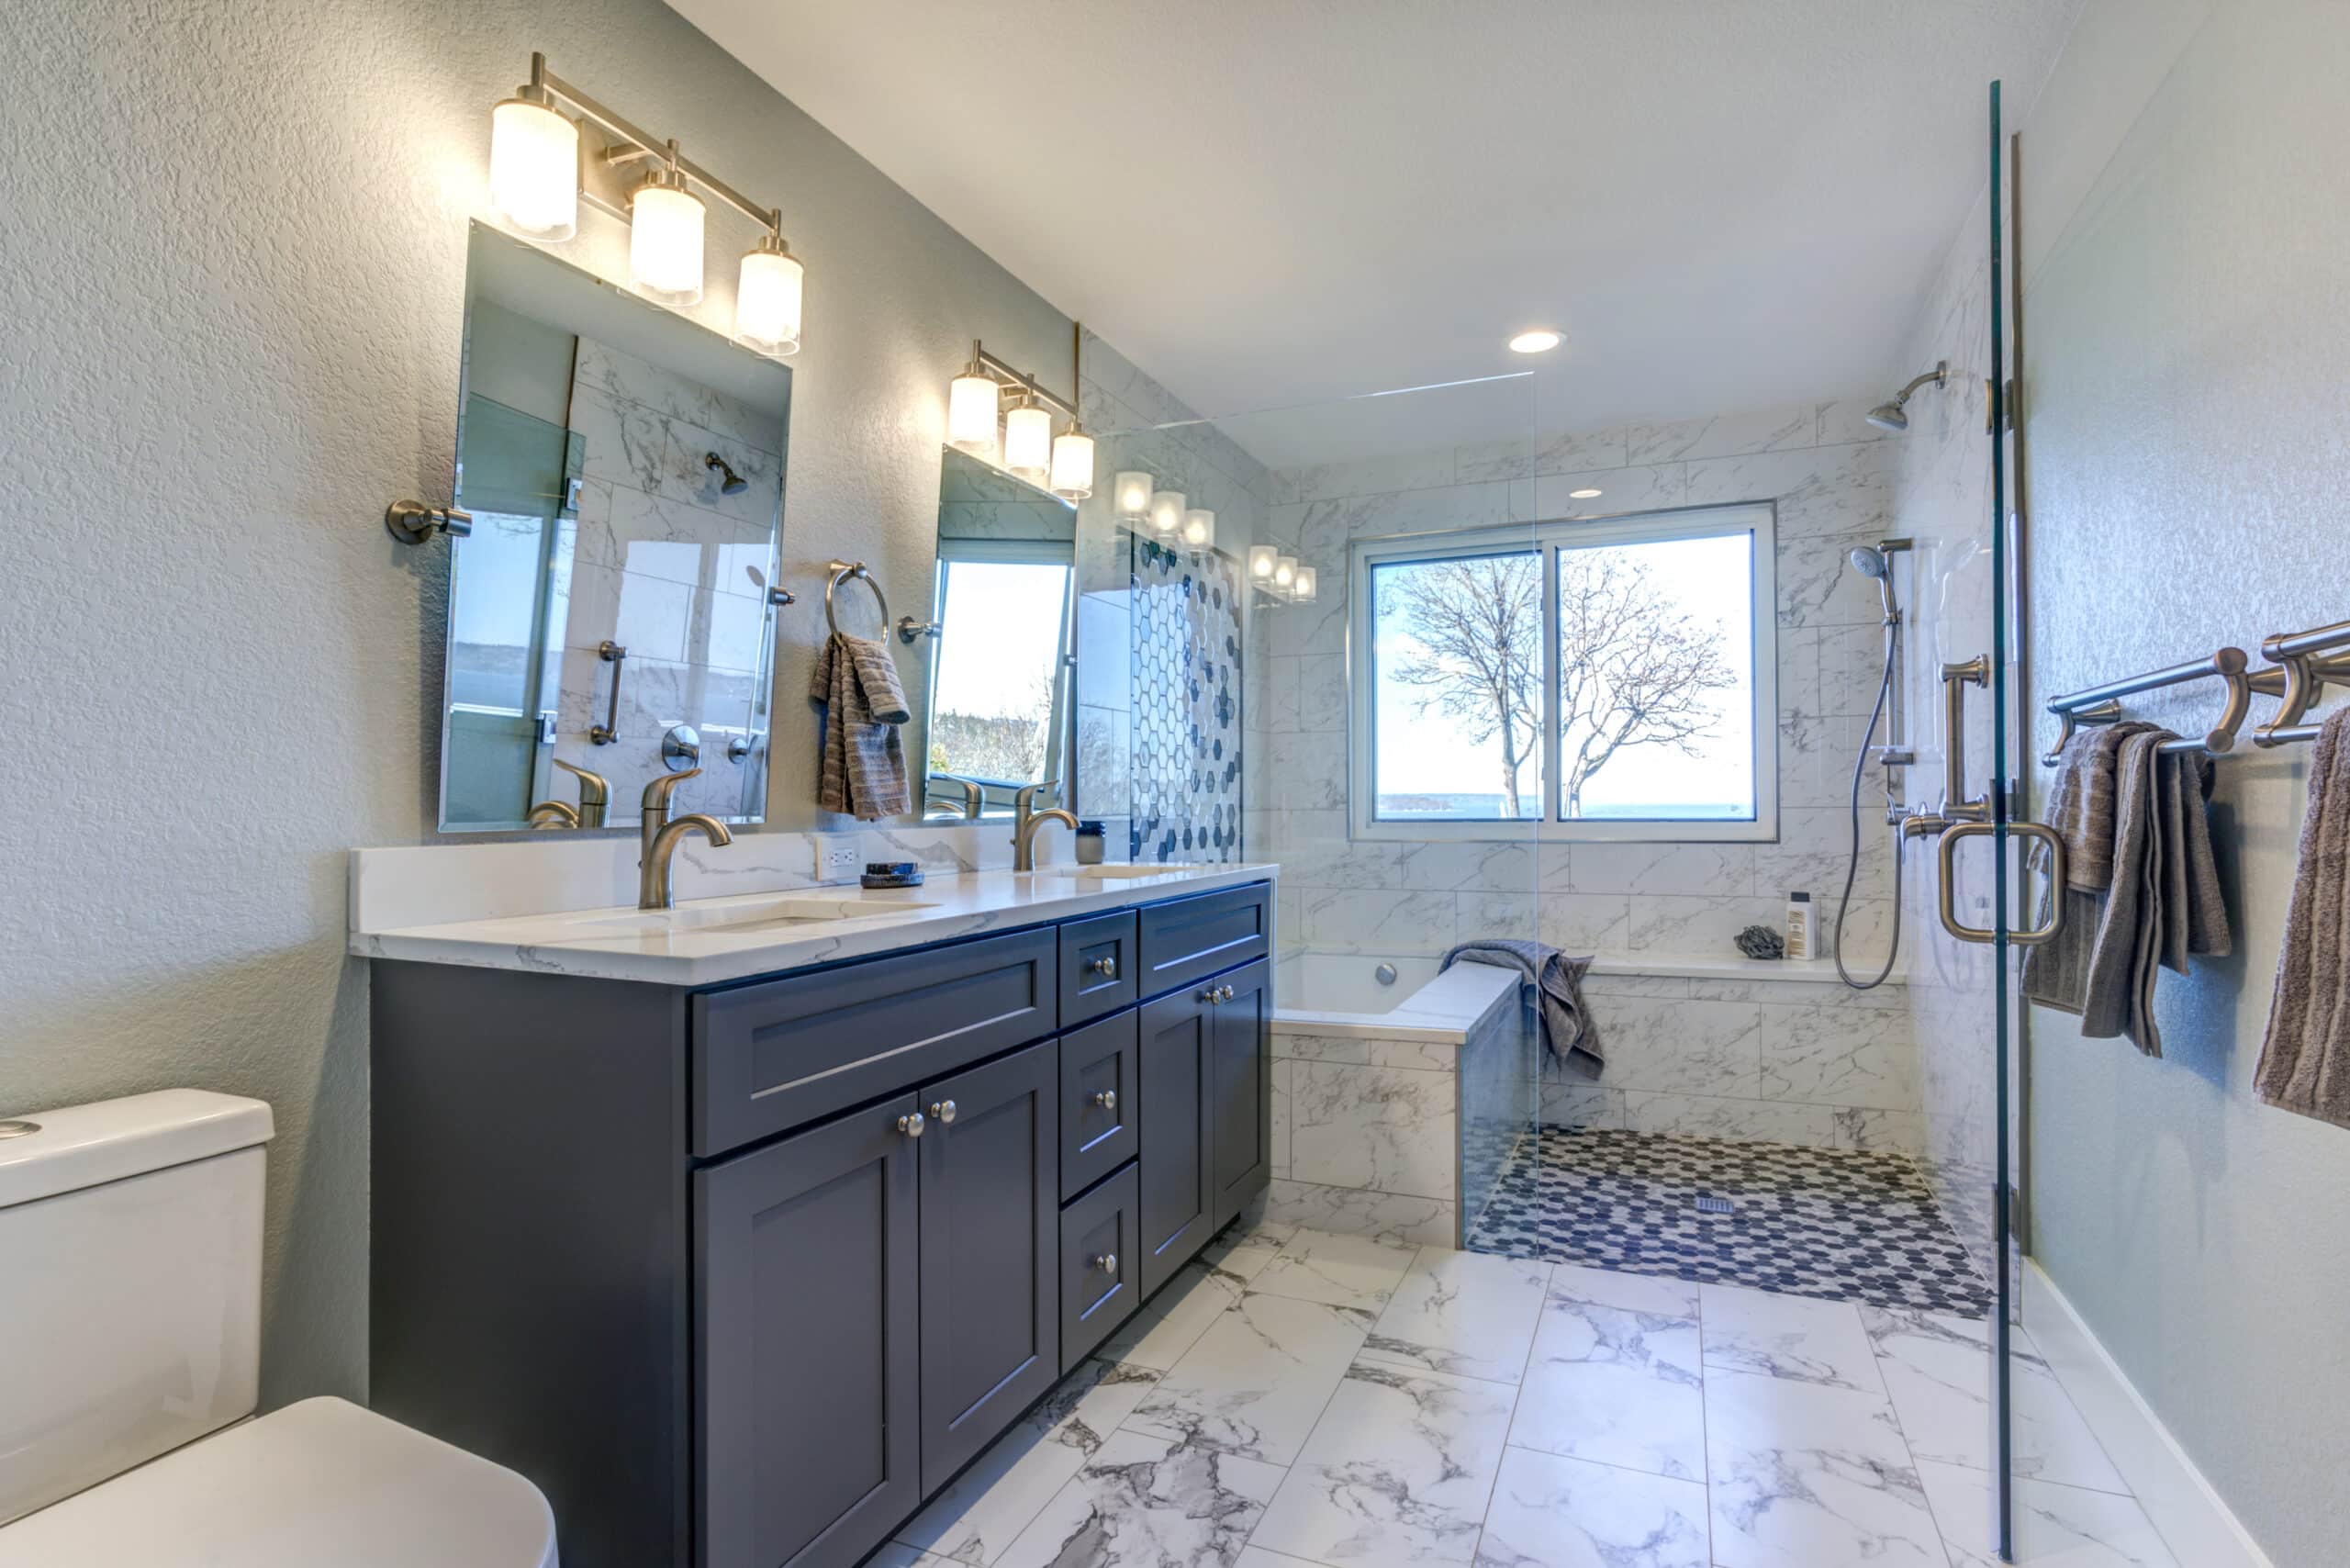 Luxury bathroom interior with blue dual washstand atop marble floor.